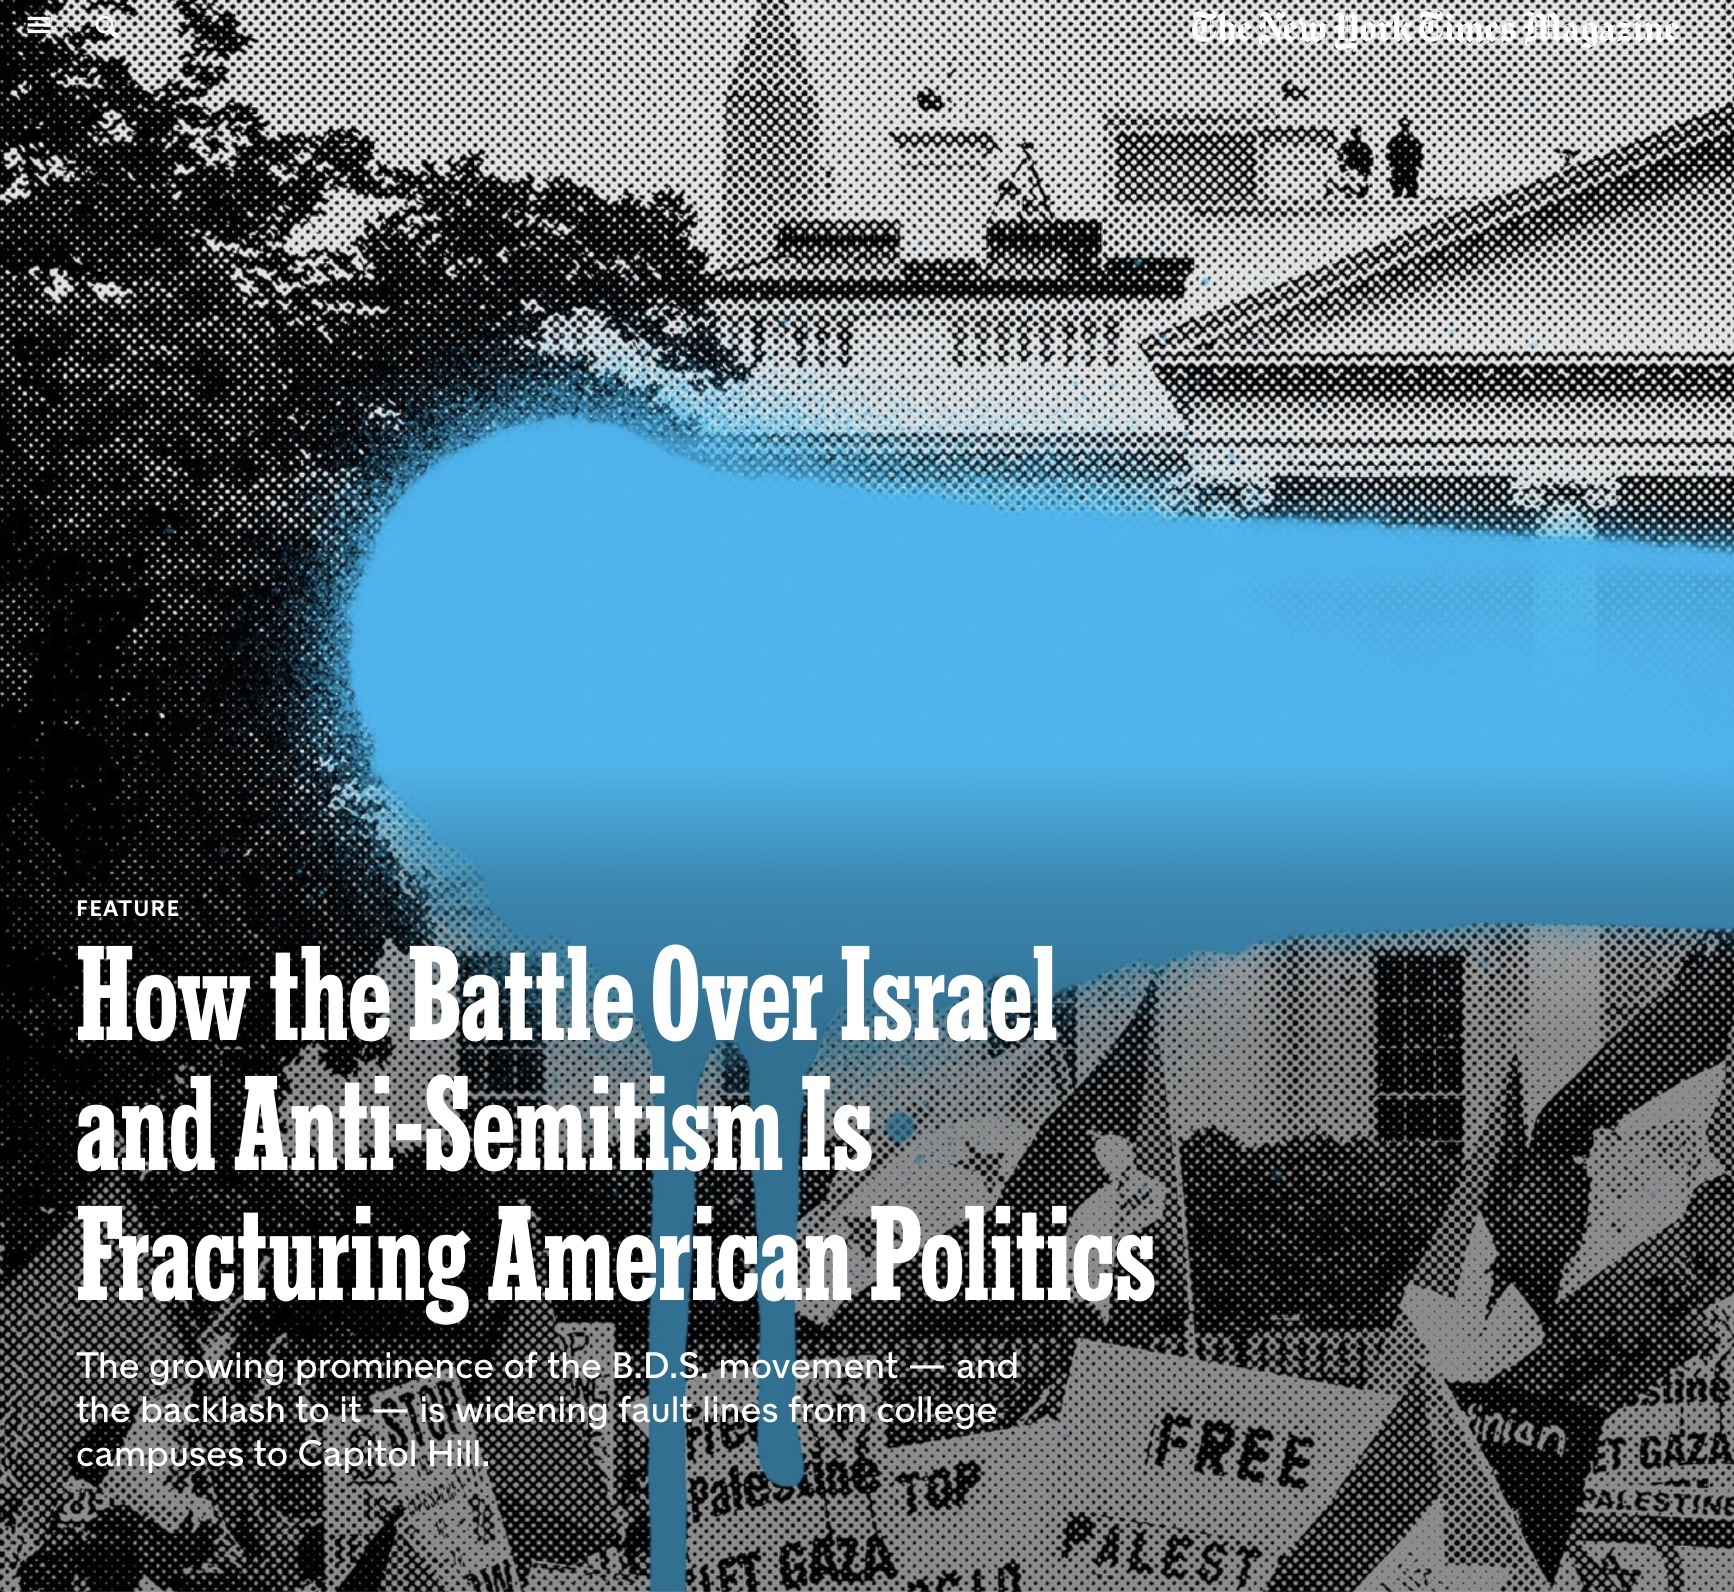 NYT Magazine: How the Battle Over Israel is Fracturing US Politics